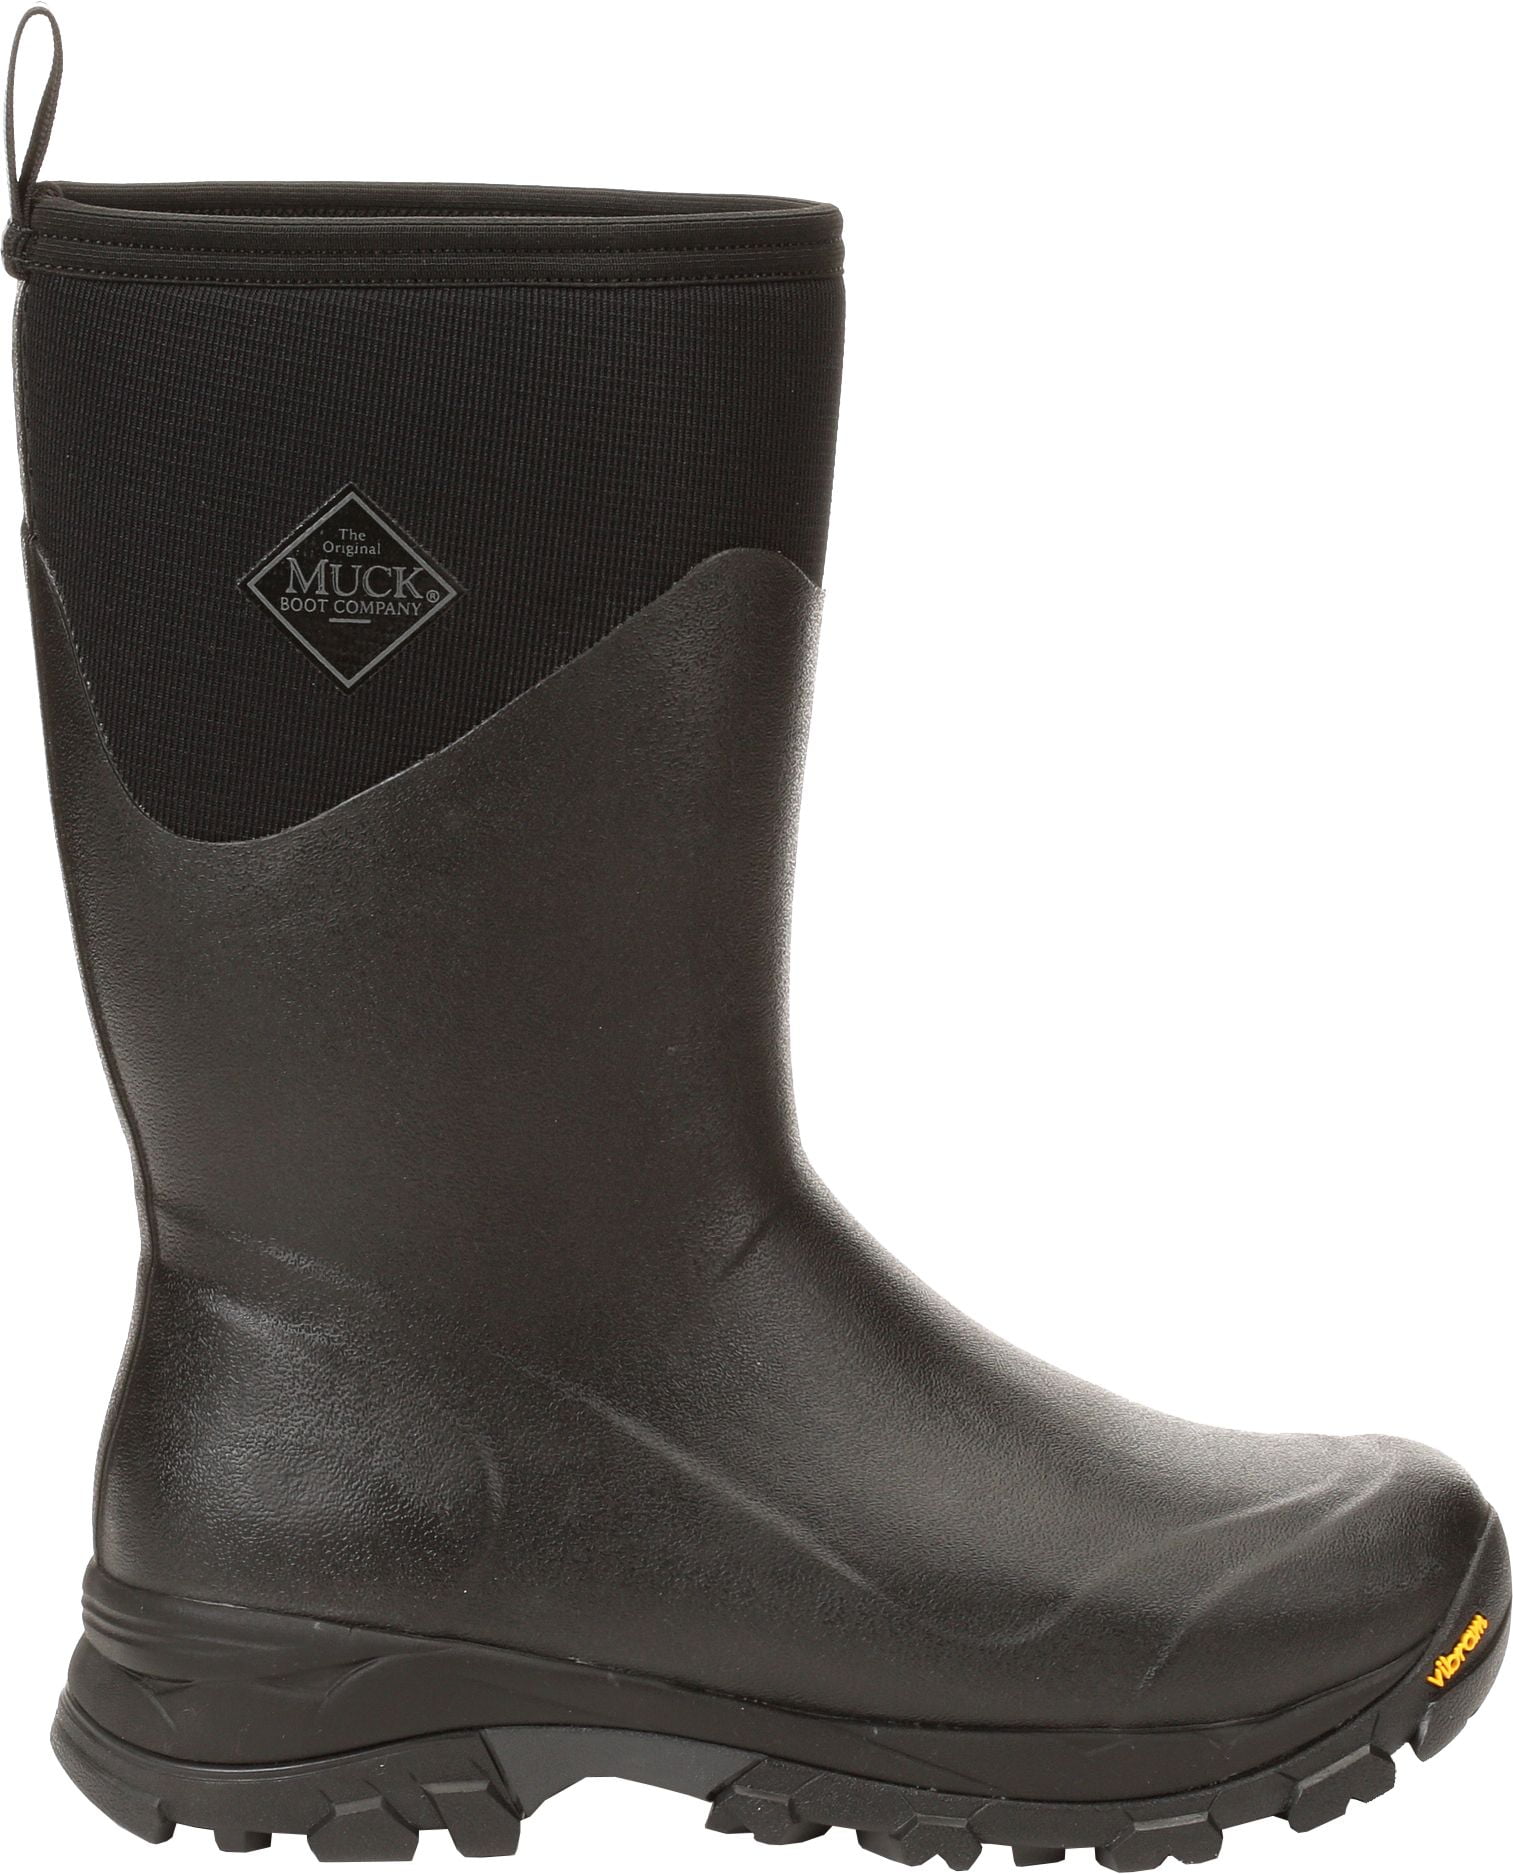 Muck Boot Company - Muck Boots Men's Arctic Ice Mid Insulated ...